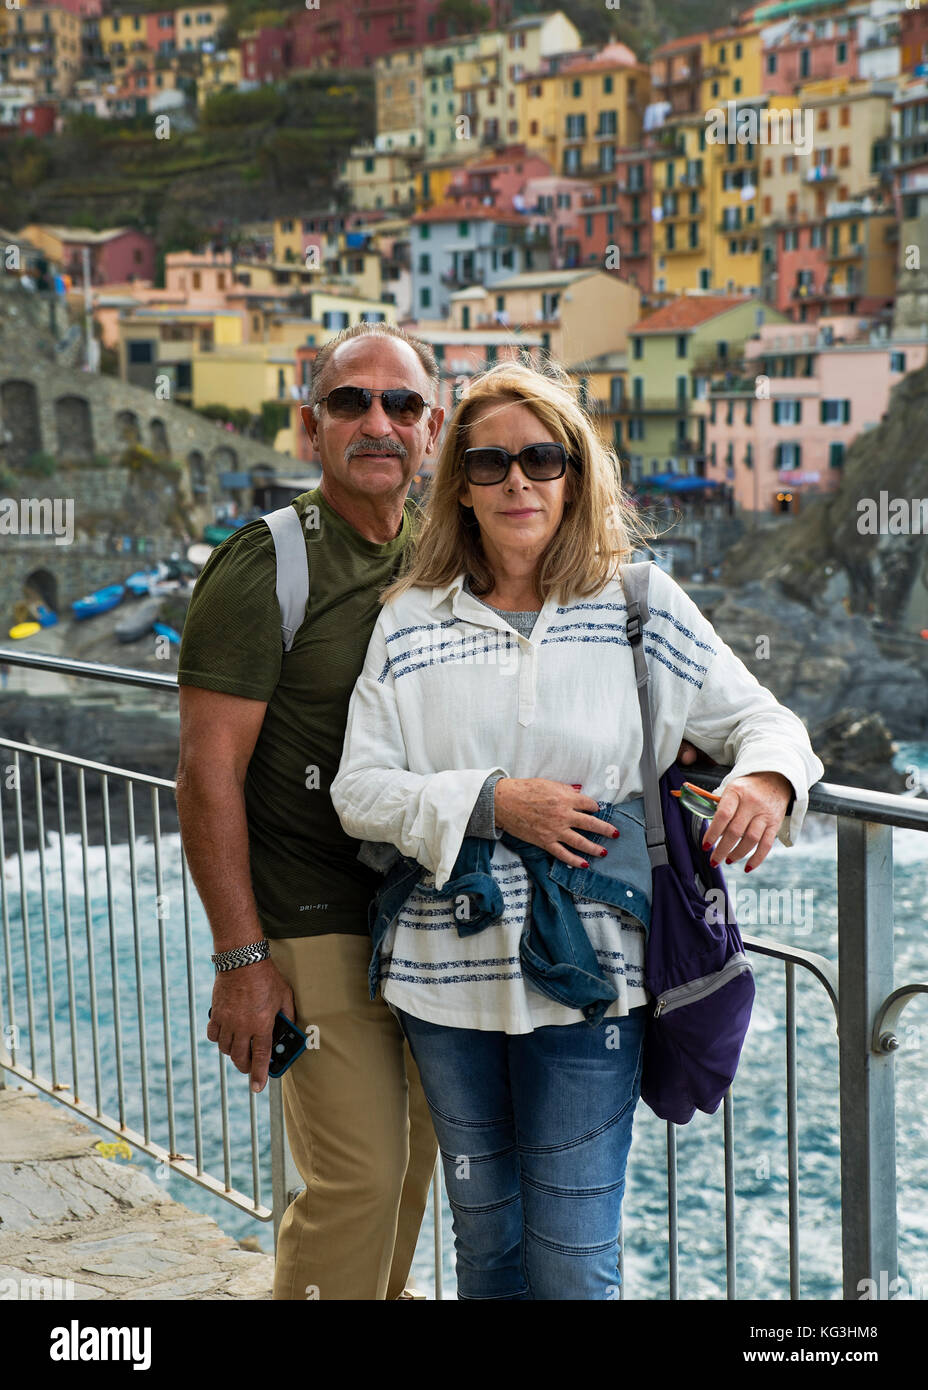 Couple poses for a snapshot while traveling, in Riomaggiore, Cinque Terre, Italy. Stock Photo